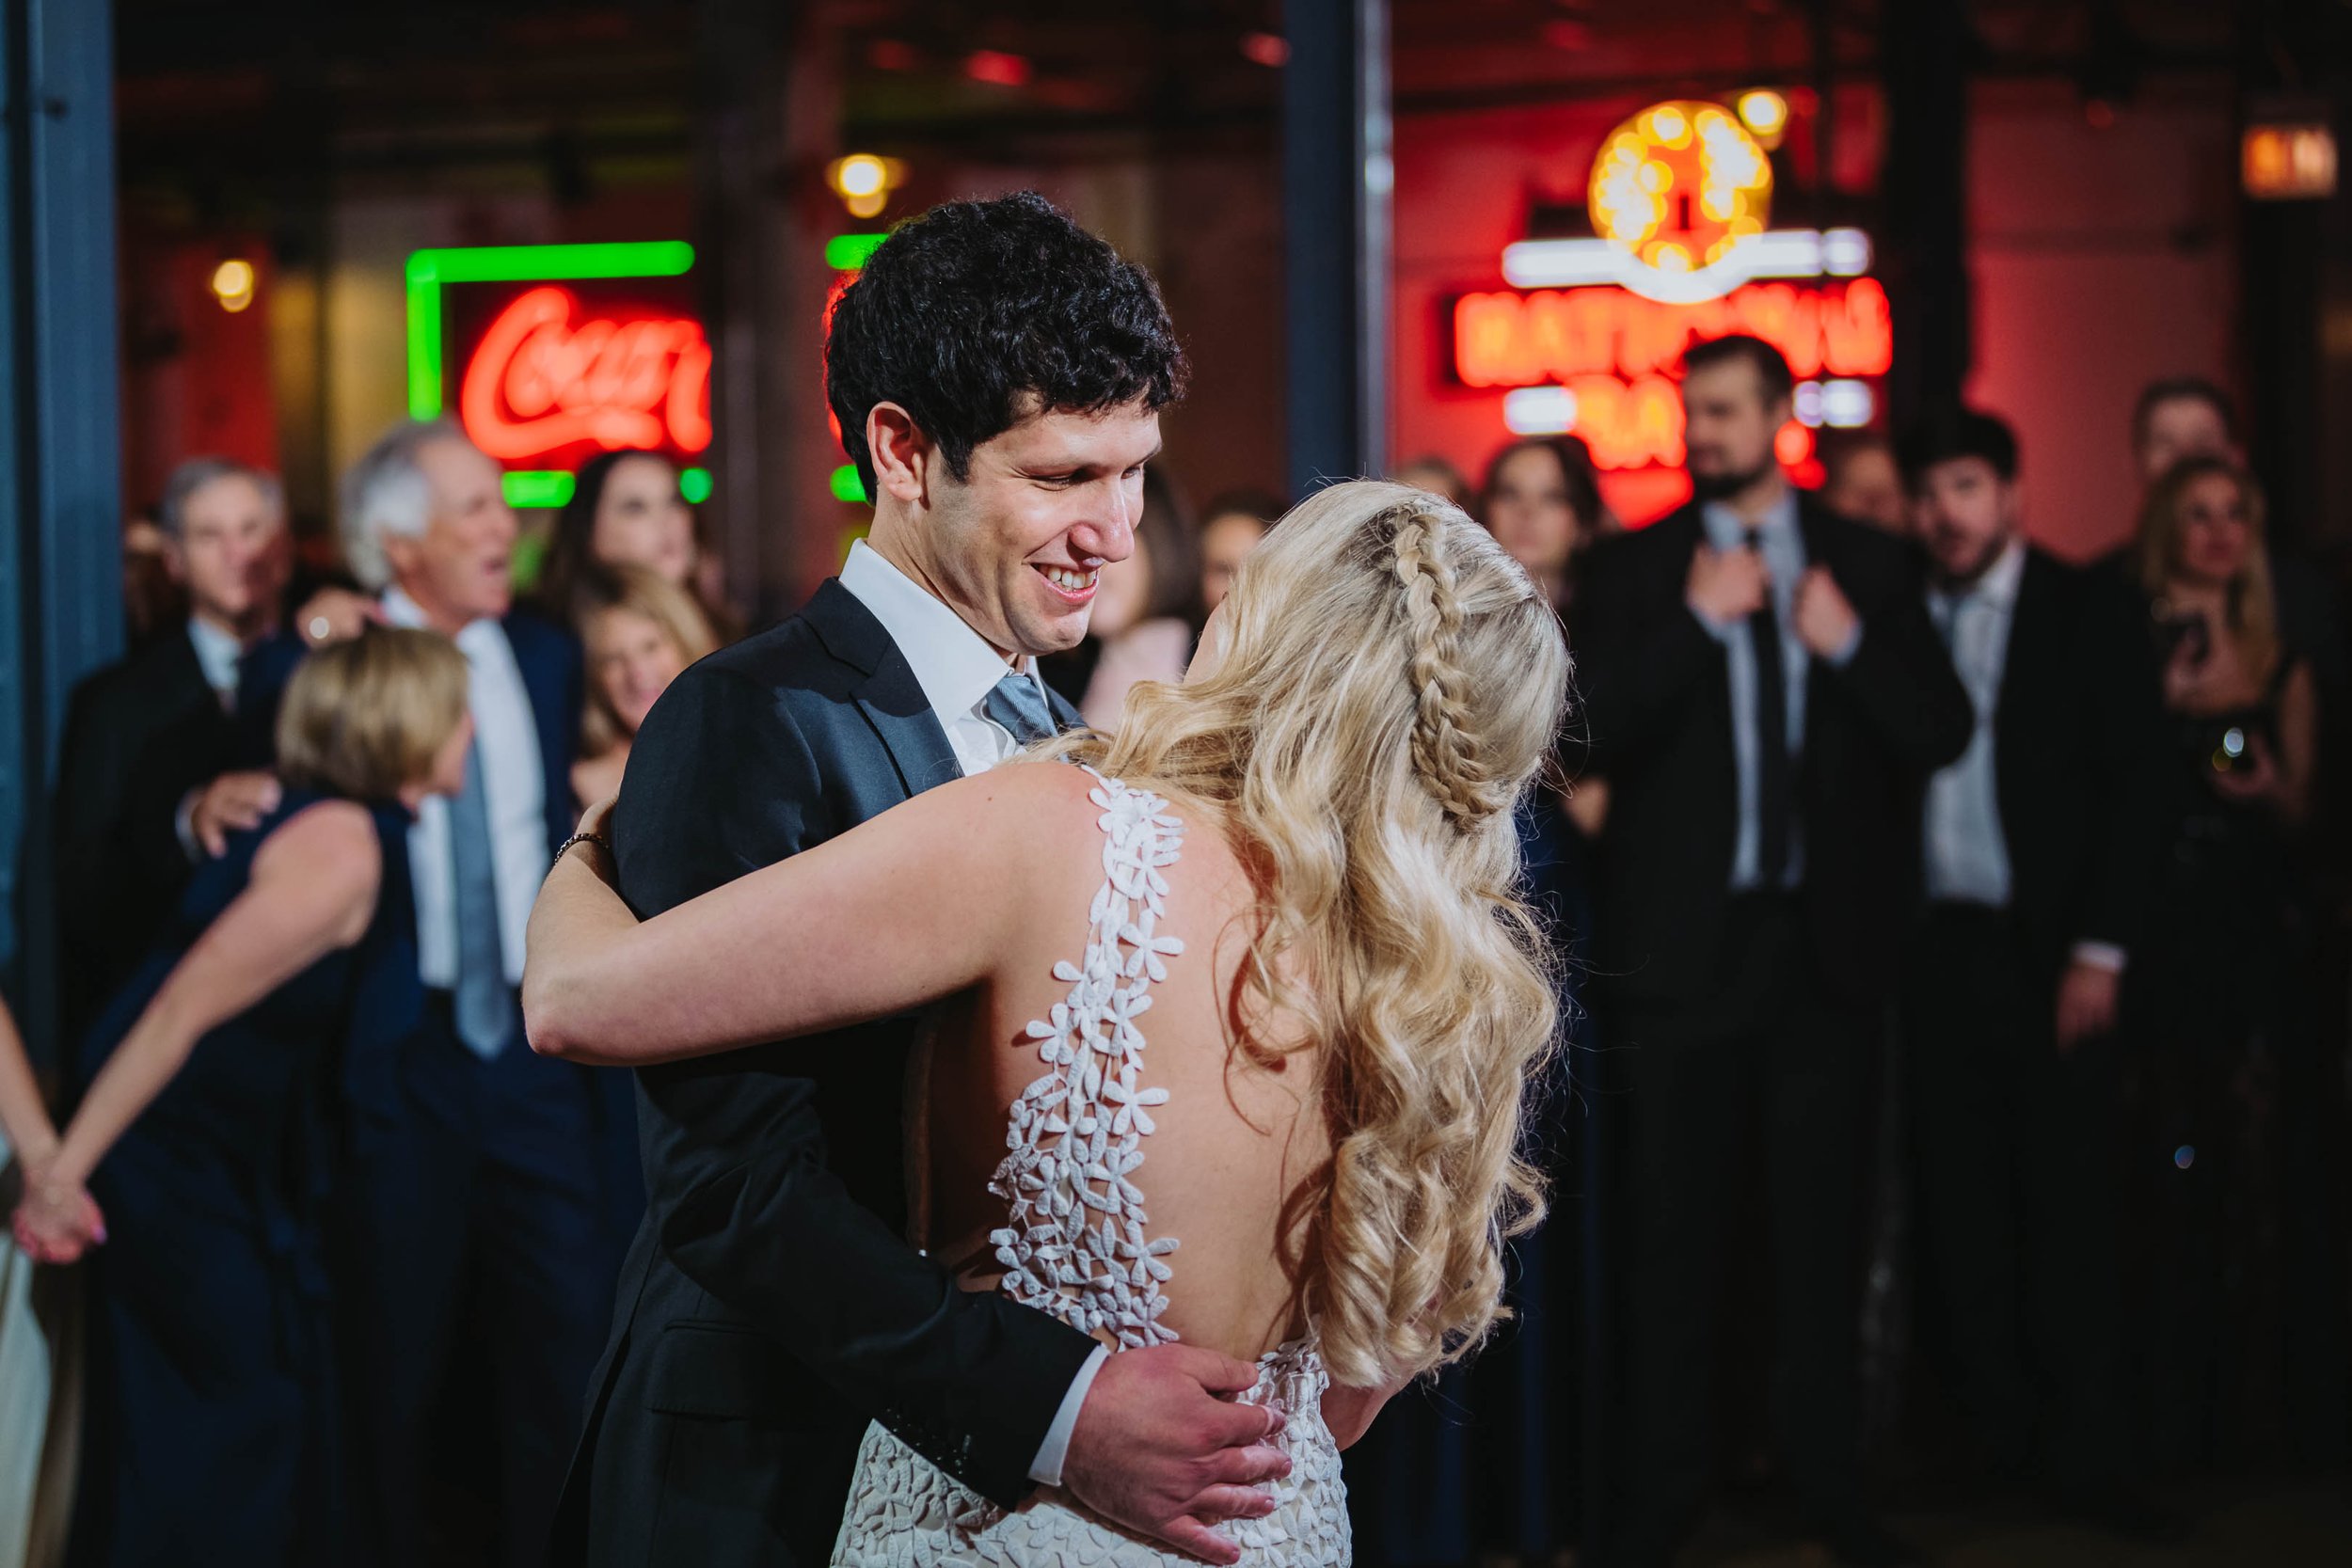 Chicago Wedding Photographer | Ravenswood Event Center | J. Brown Photography | bride and groom first dance moment